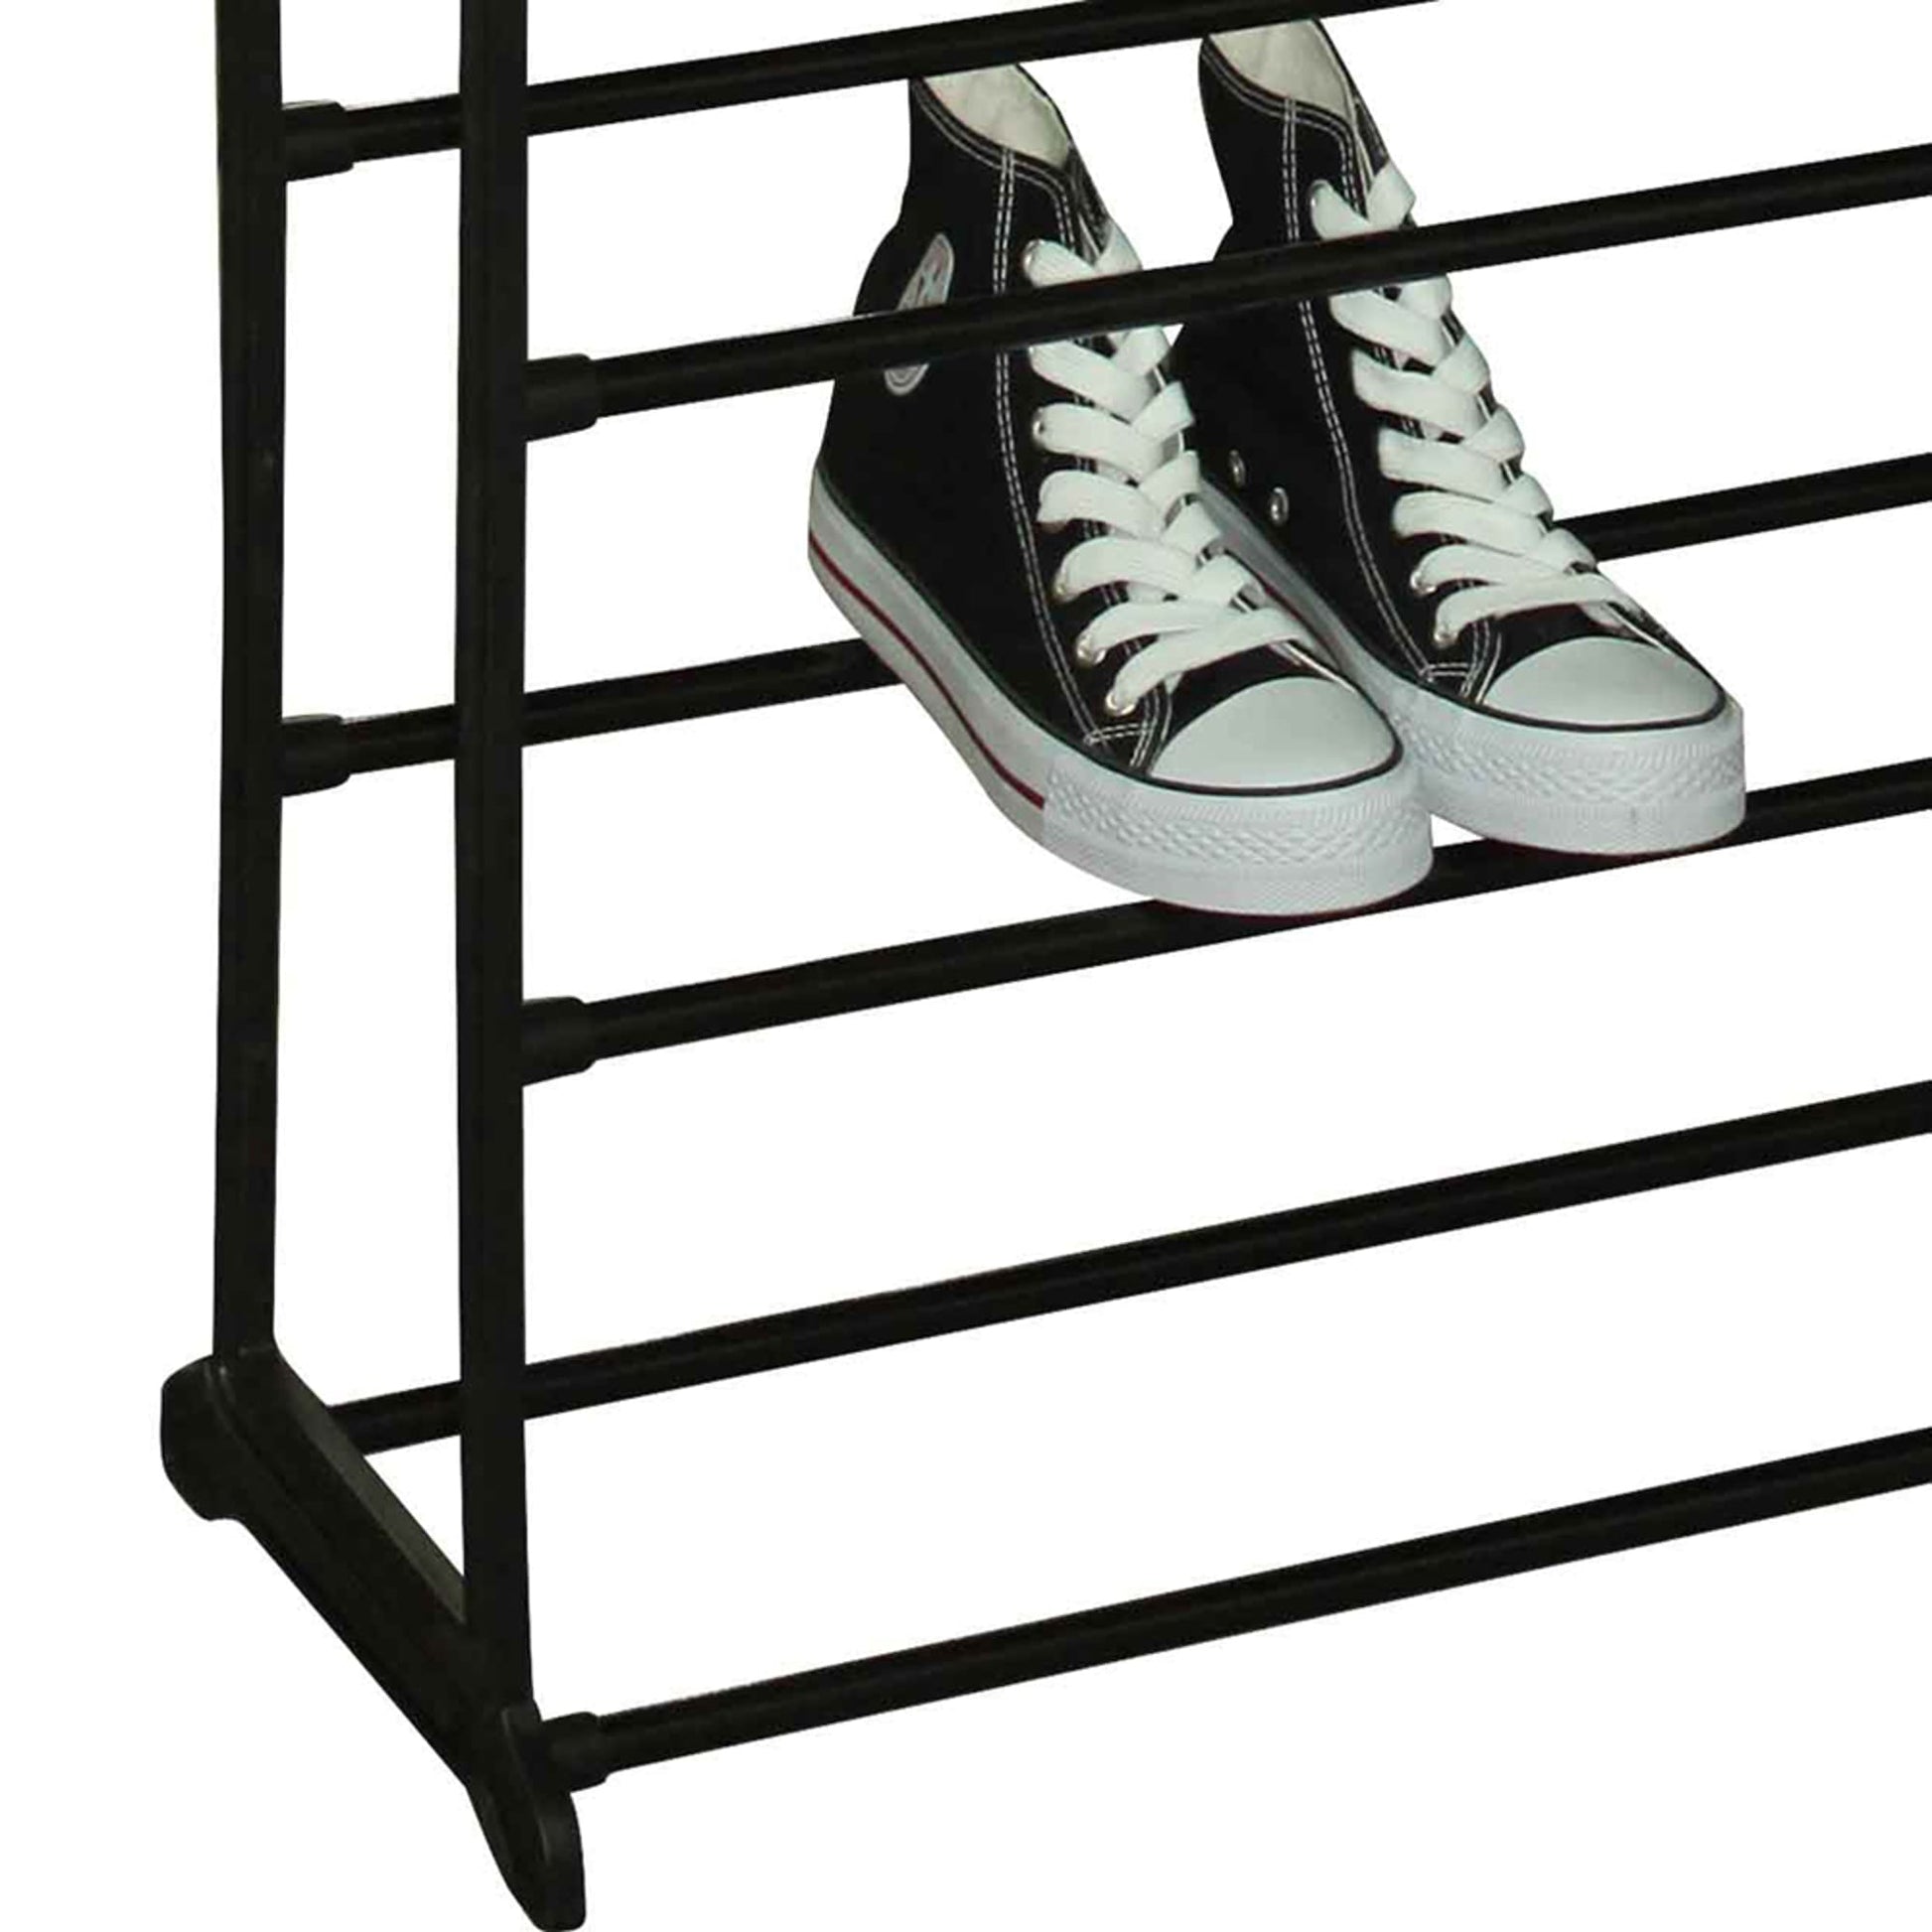 UWR-Nite 10 Tiers Shoe Rack Organizer 50 Pairs,Adjustable Shoes Shelf Tower  Metal Tall for Closet,DIY Assembly 